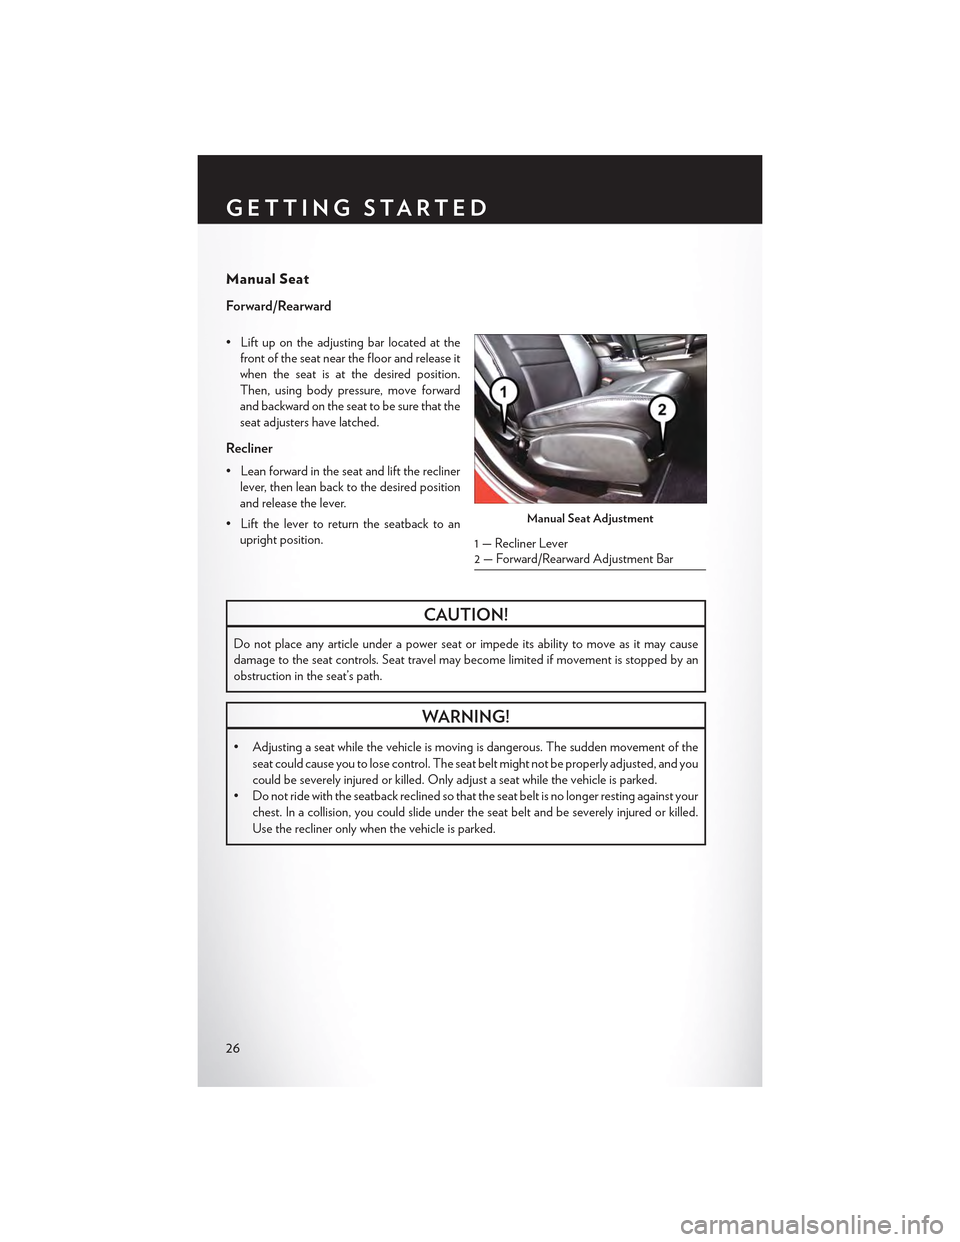 CHRYSLER 300 2015 2.G User Guide Manual Seat
Forward/Rearward
•Liftupontheadjustingbarlocatedatthe
front of the seat near the floor and release it
when the seat is at the desired position.
Then, using body pressure, move forward
an